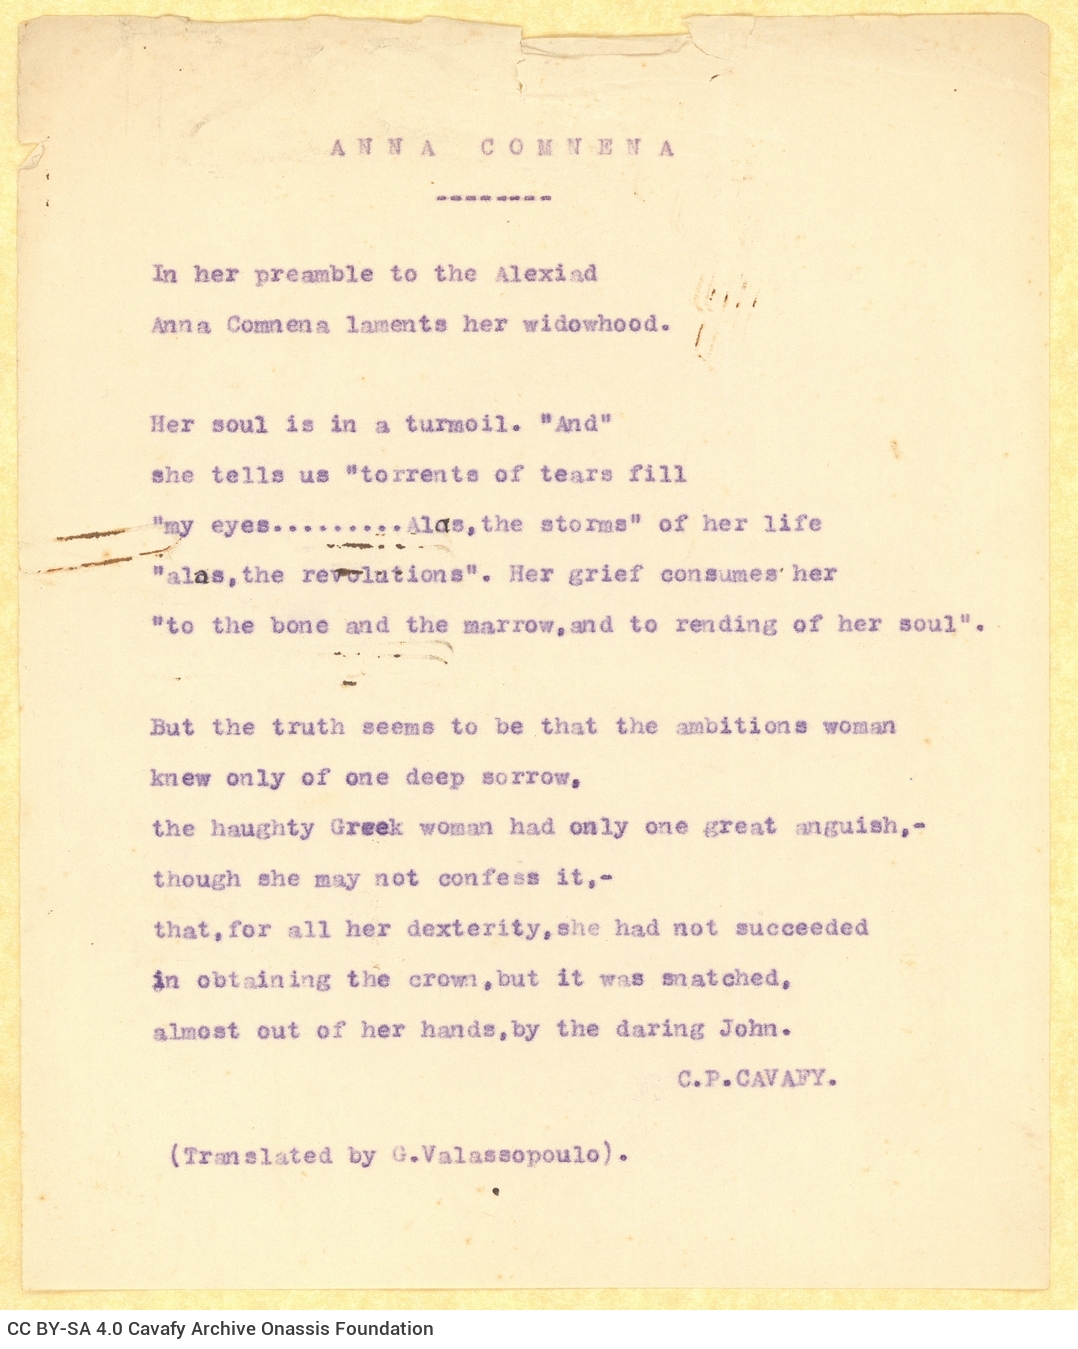 Two typewritten copies of the English translation of the poem "Anna Comnena" by G. Valassopoulo on the recto of two sheets